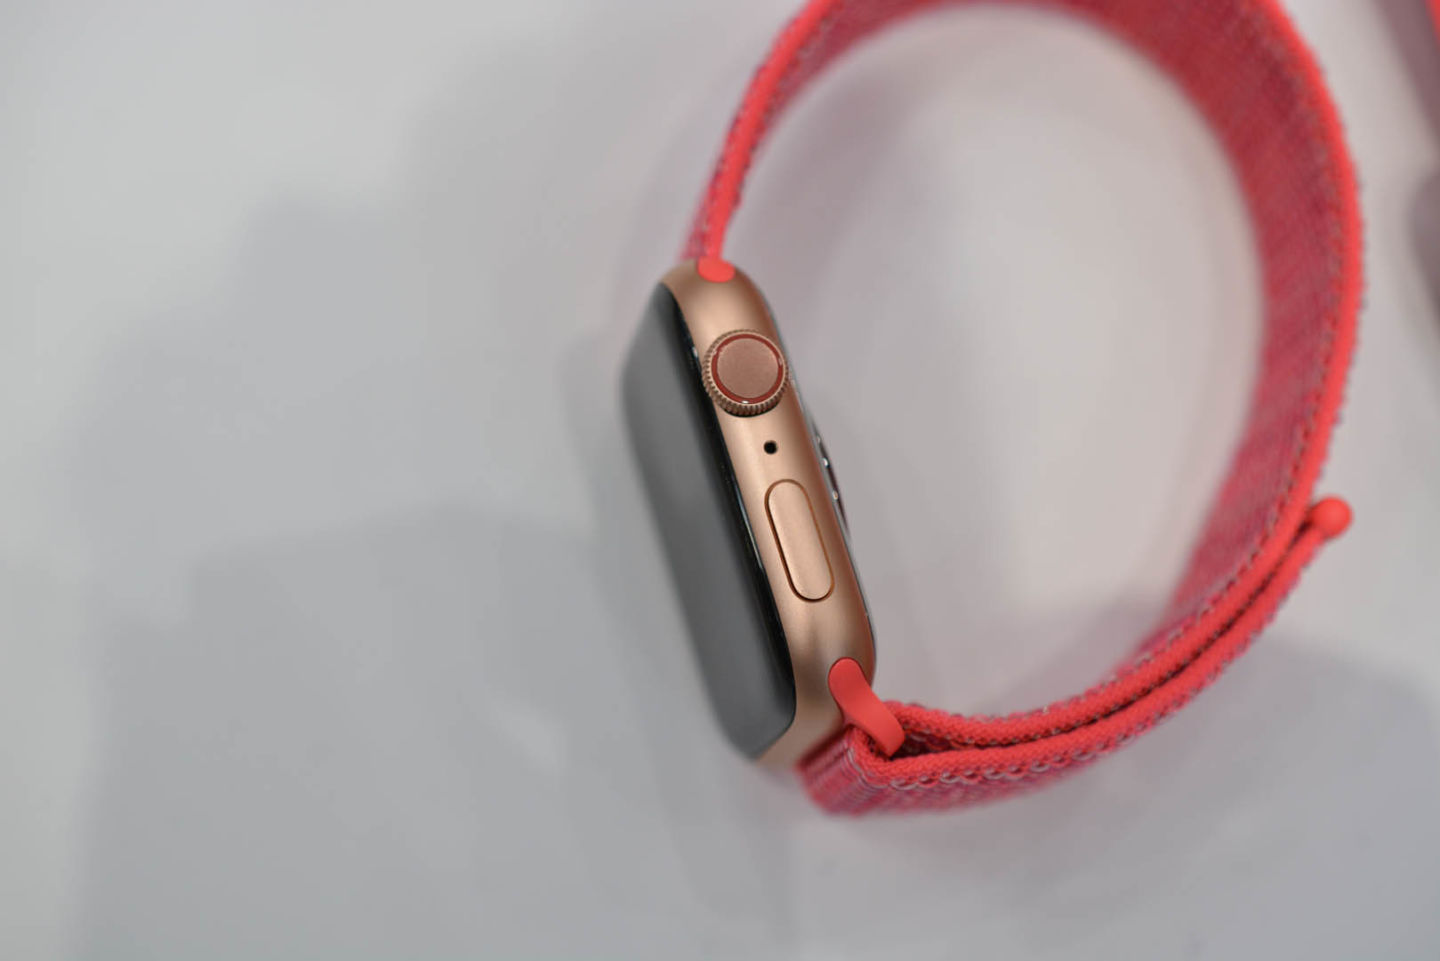 Apple Watch Series 4 hands on Sparking envy in current Apple Watch owners2018/19 By PakUrduWorld